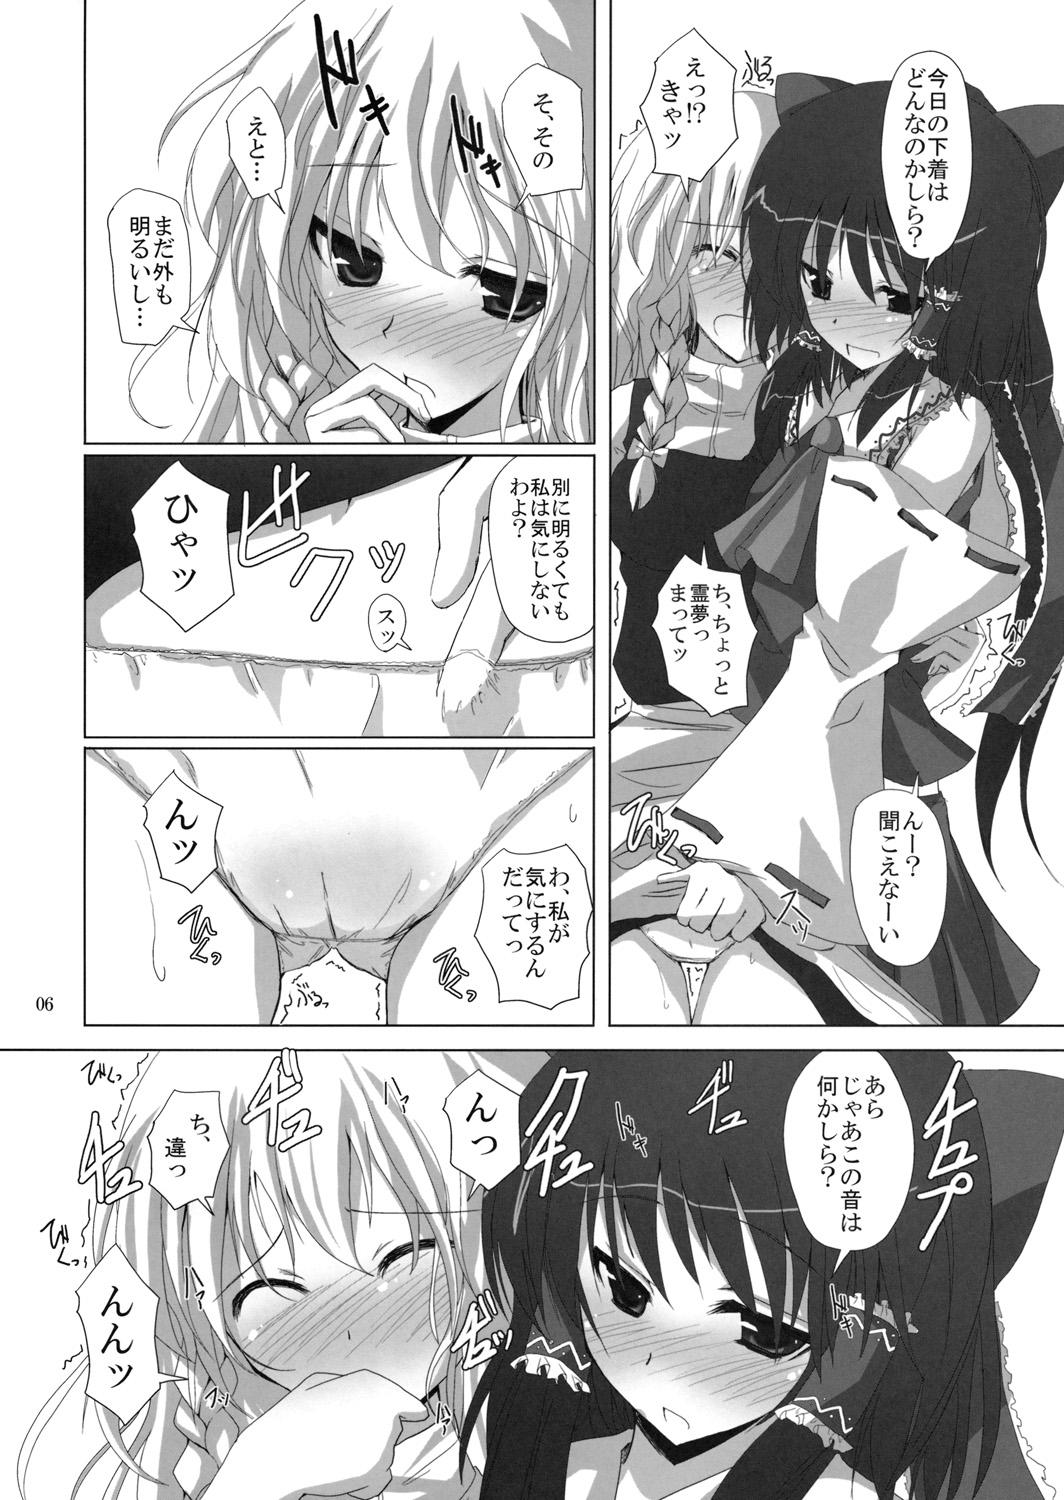 Jerkoff Gensou Kitan 11 - Touhou project Longhair - Page 5